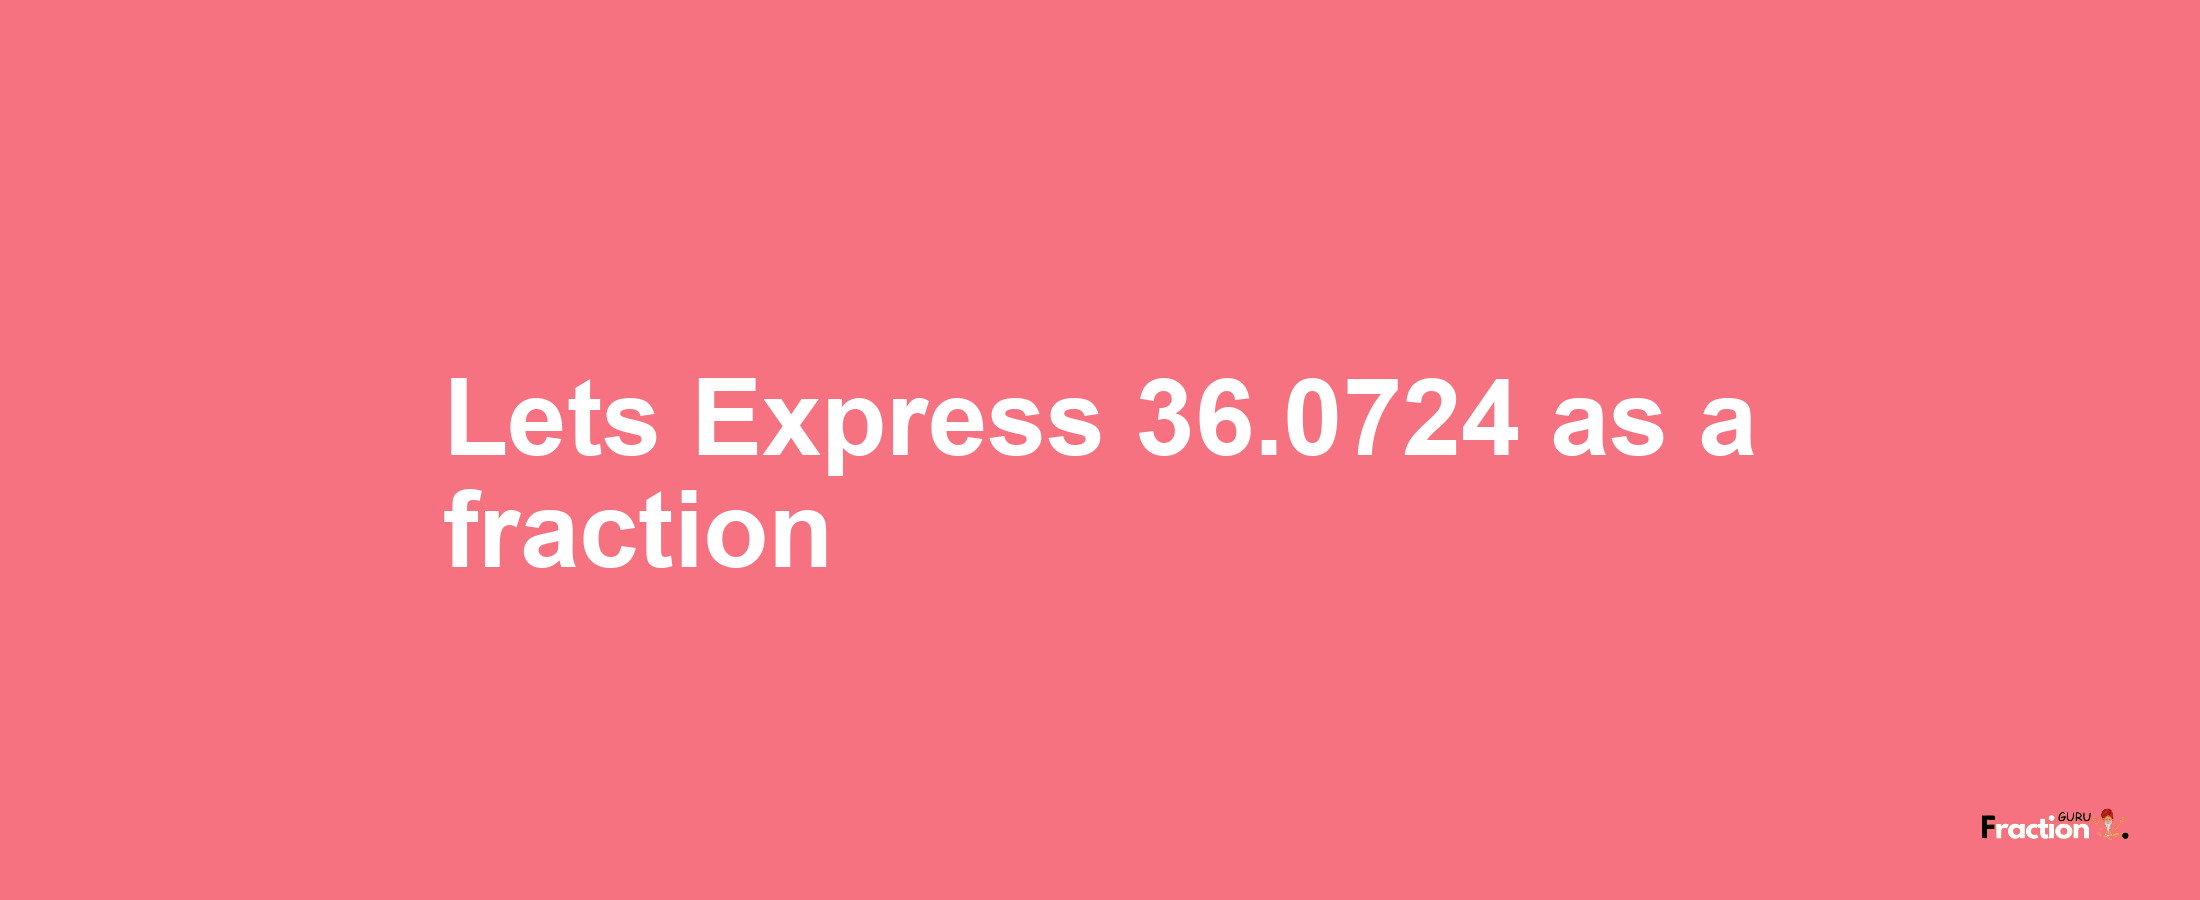 Lets Express 36.0724 as afraction